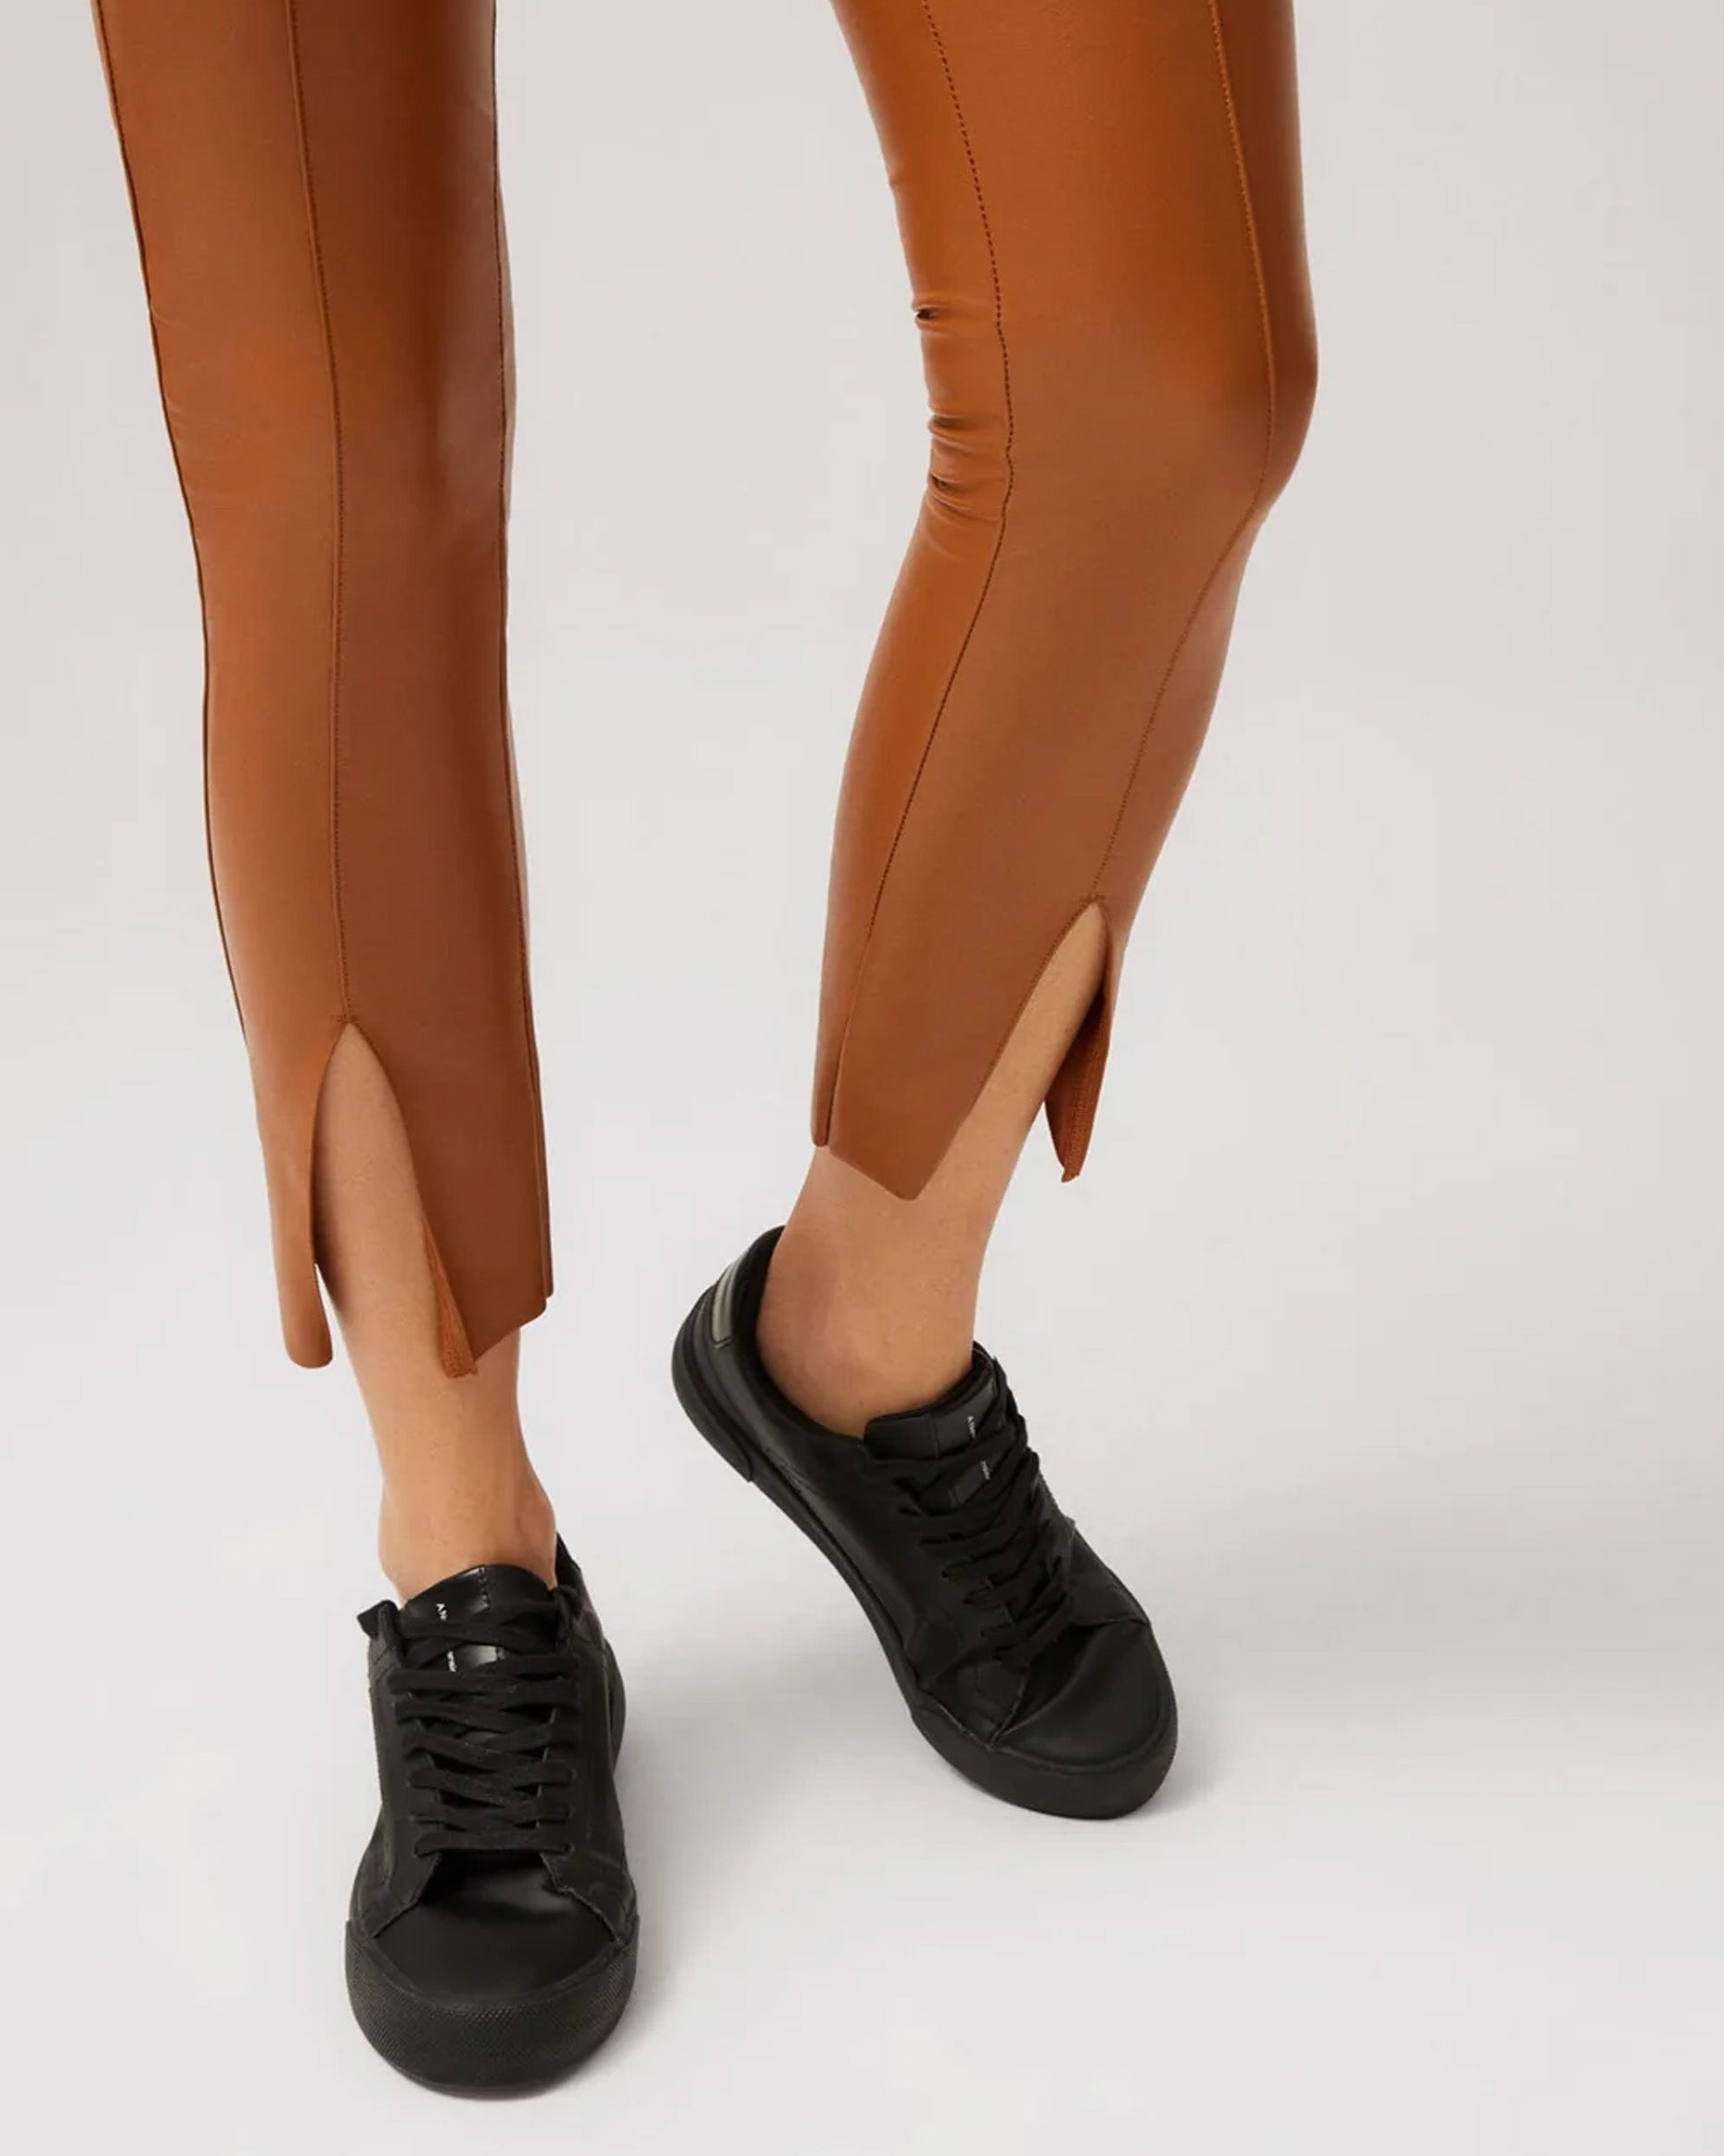 Ysabel Mora 70295 Faux Leather Slit Leggings - Tight fit faux leather thermal camel coloured leggings with a warm plush fleece lining, centre seam down the front, slit opening at the bottom worn with black sneakers.